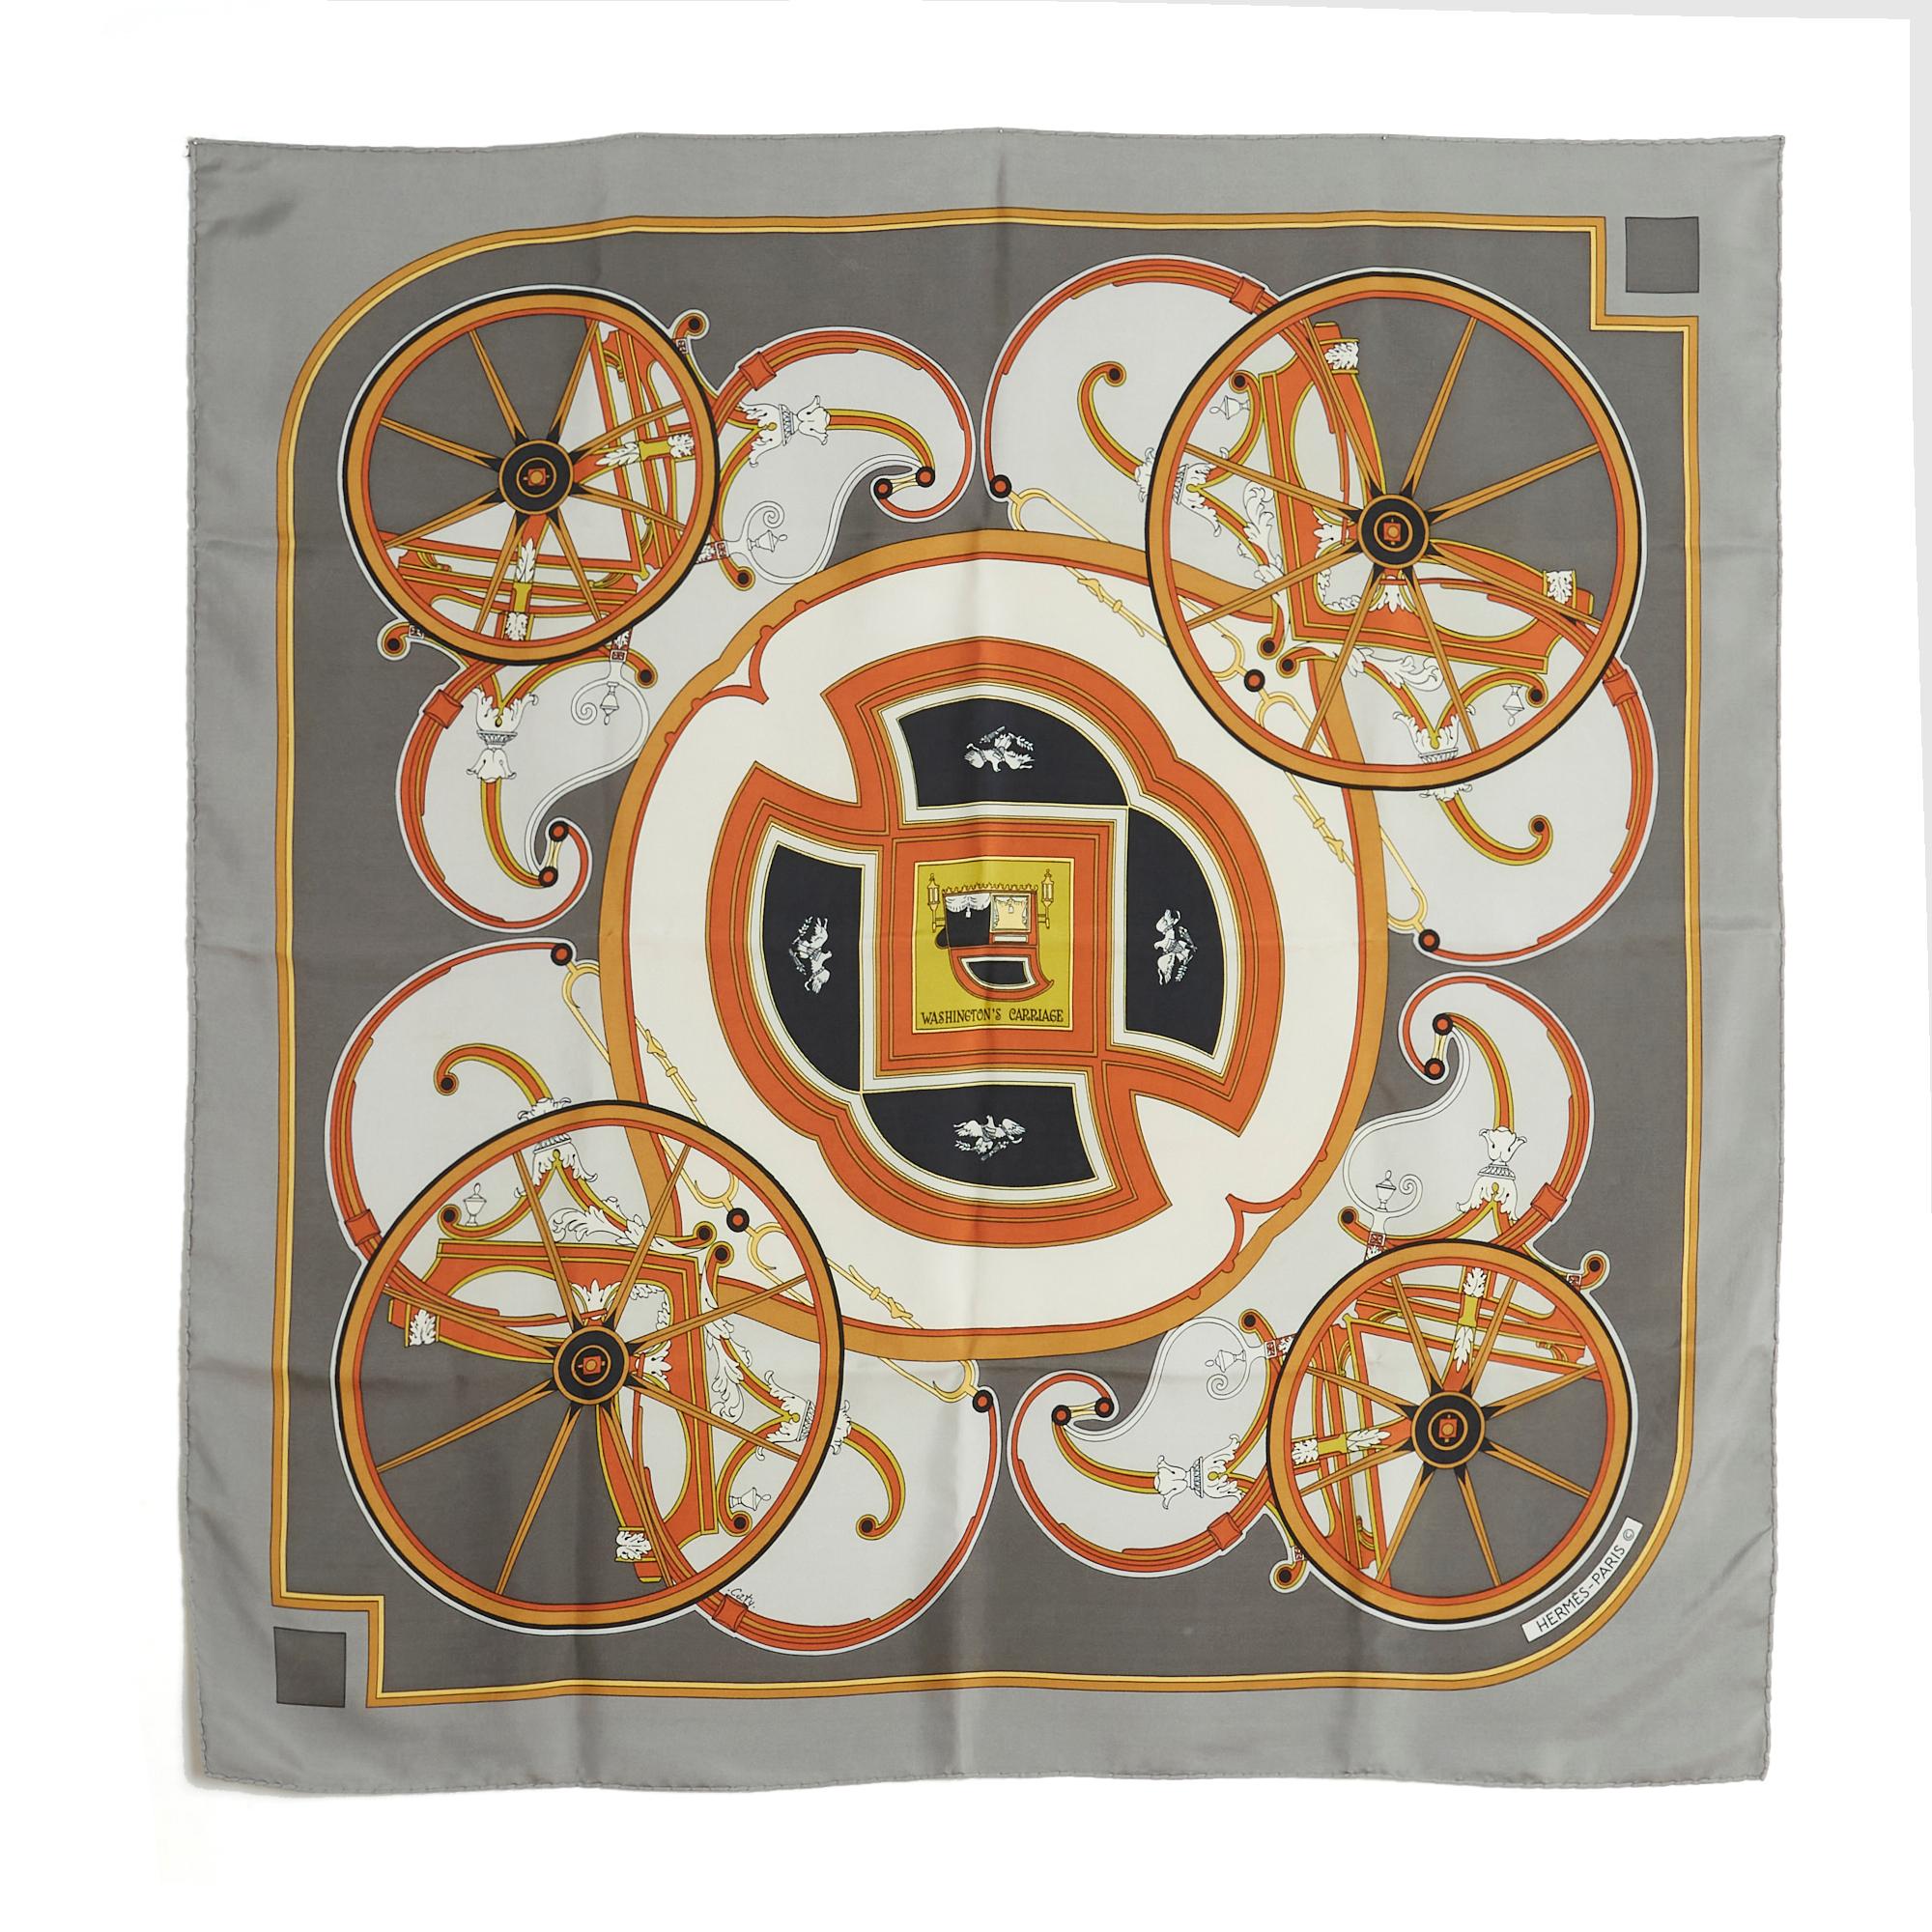 Hermès square 90 scarf in silk twill, Washington's Carriage pattern by Cathy Latham, published in 1979 and re-edited in 1981, light gray patterns, medium gray edges. Width 90 cm x length 90 cm approximately. The square is vintage and it probably